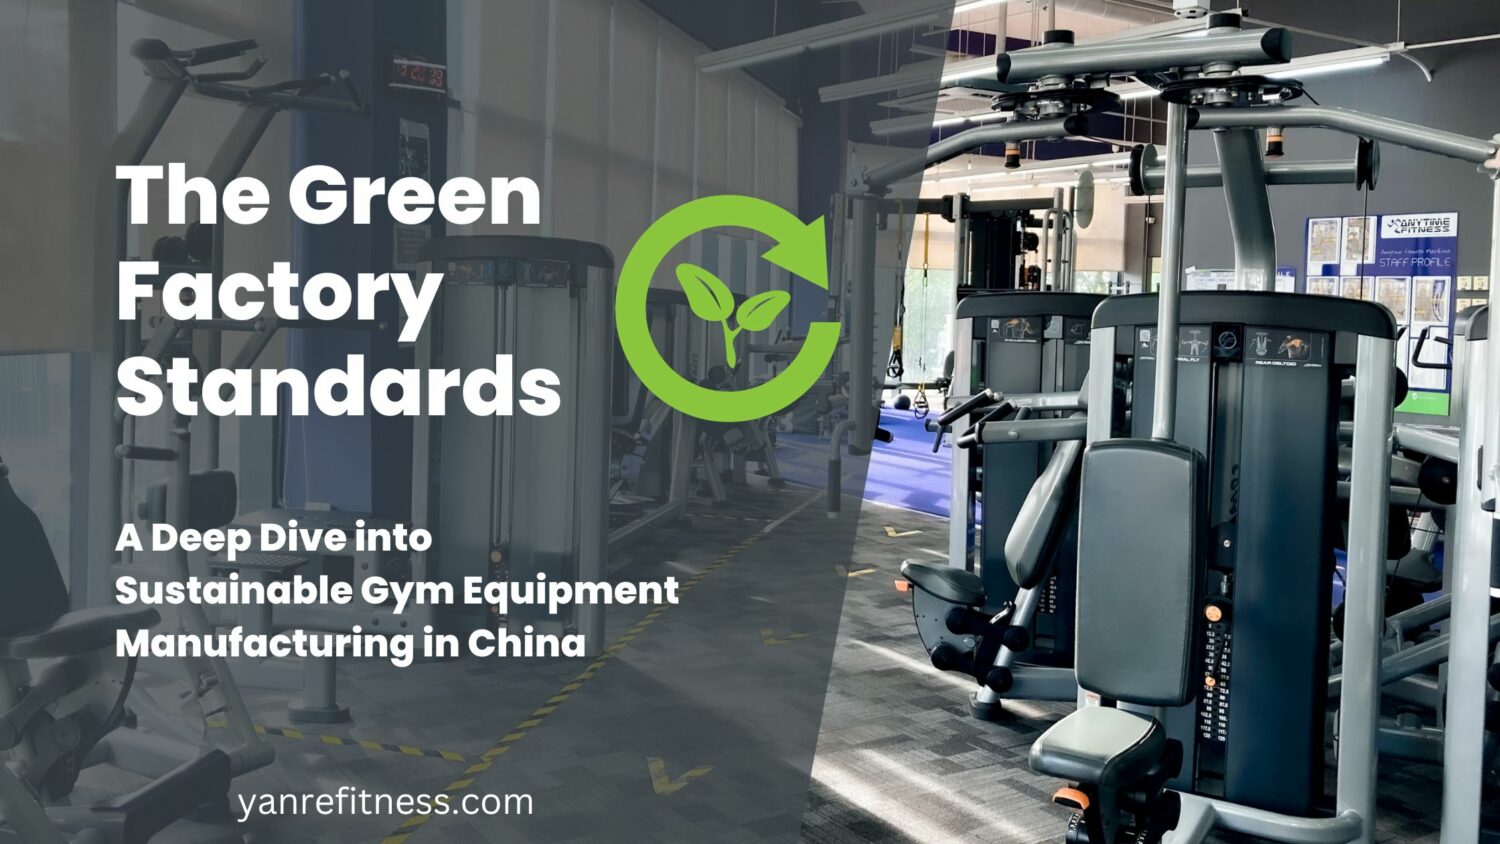 A Deep Dive into Sustainable Gym Equipment Manufacturing in China: The Green Factory Standards 1